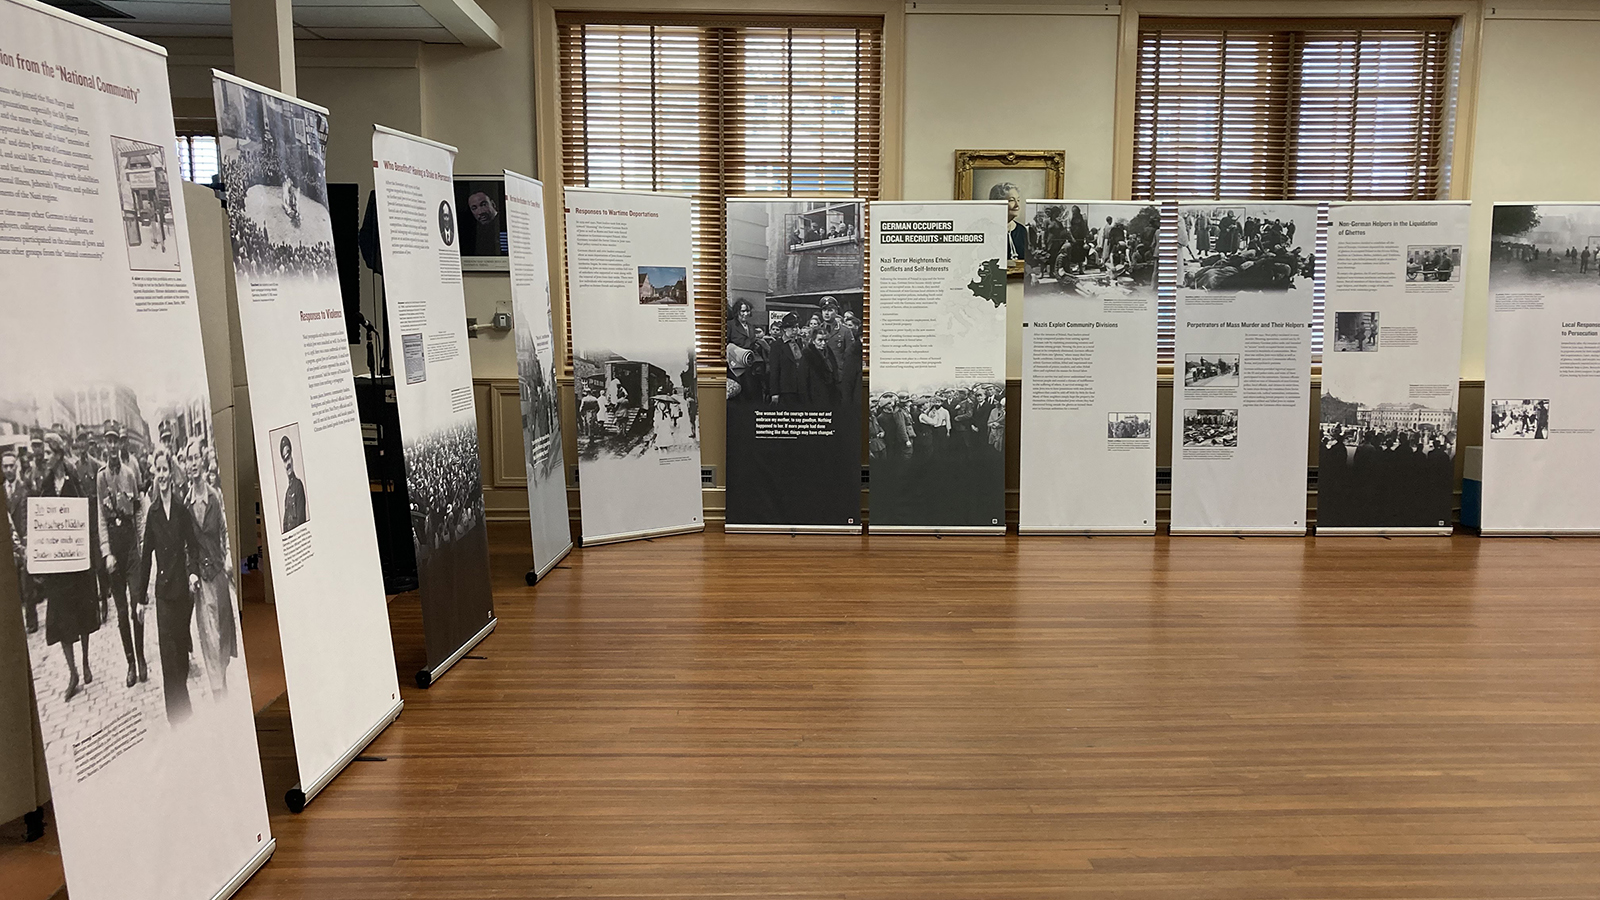 The U.S. Holocaust Memorial Museum exhibit, “Some Were Neighbors,” a set of 22 posters, has been traveling across the U.S. for the past two years and around the world since 2013. It is now on view at First Presbyterian Church in Durham, North Carolina. (RNS photo/Yonat Shimron)